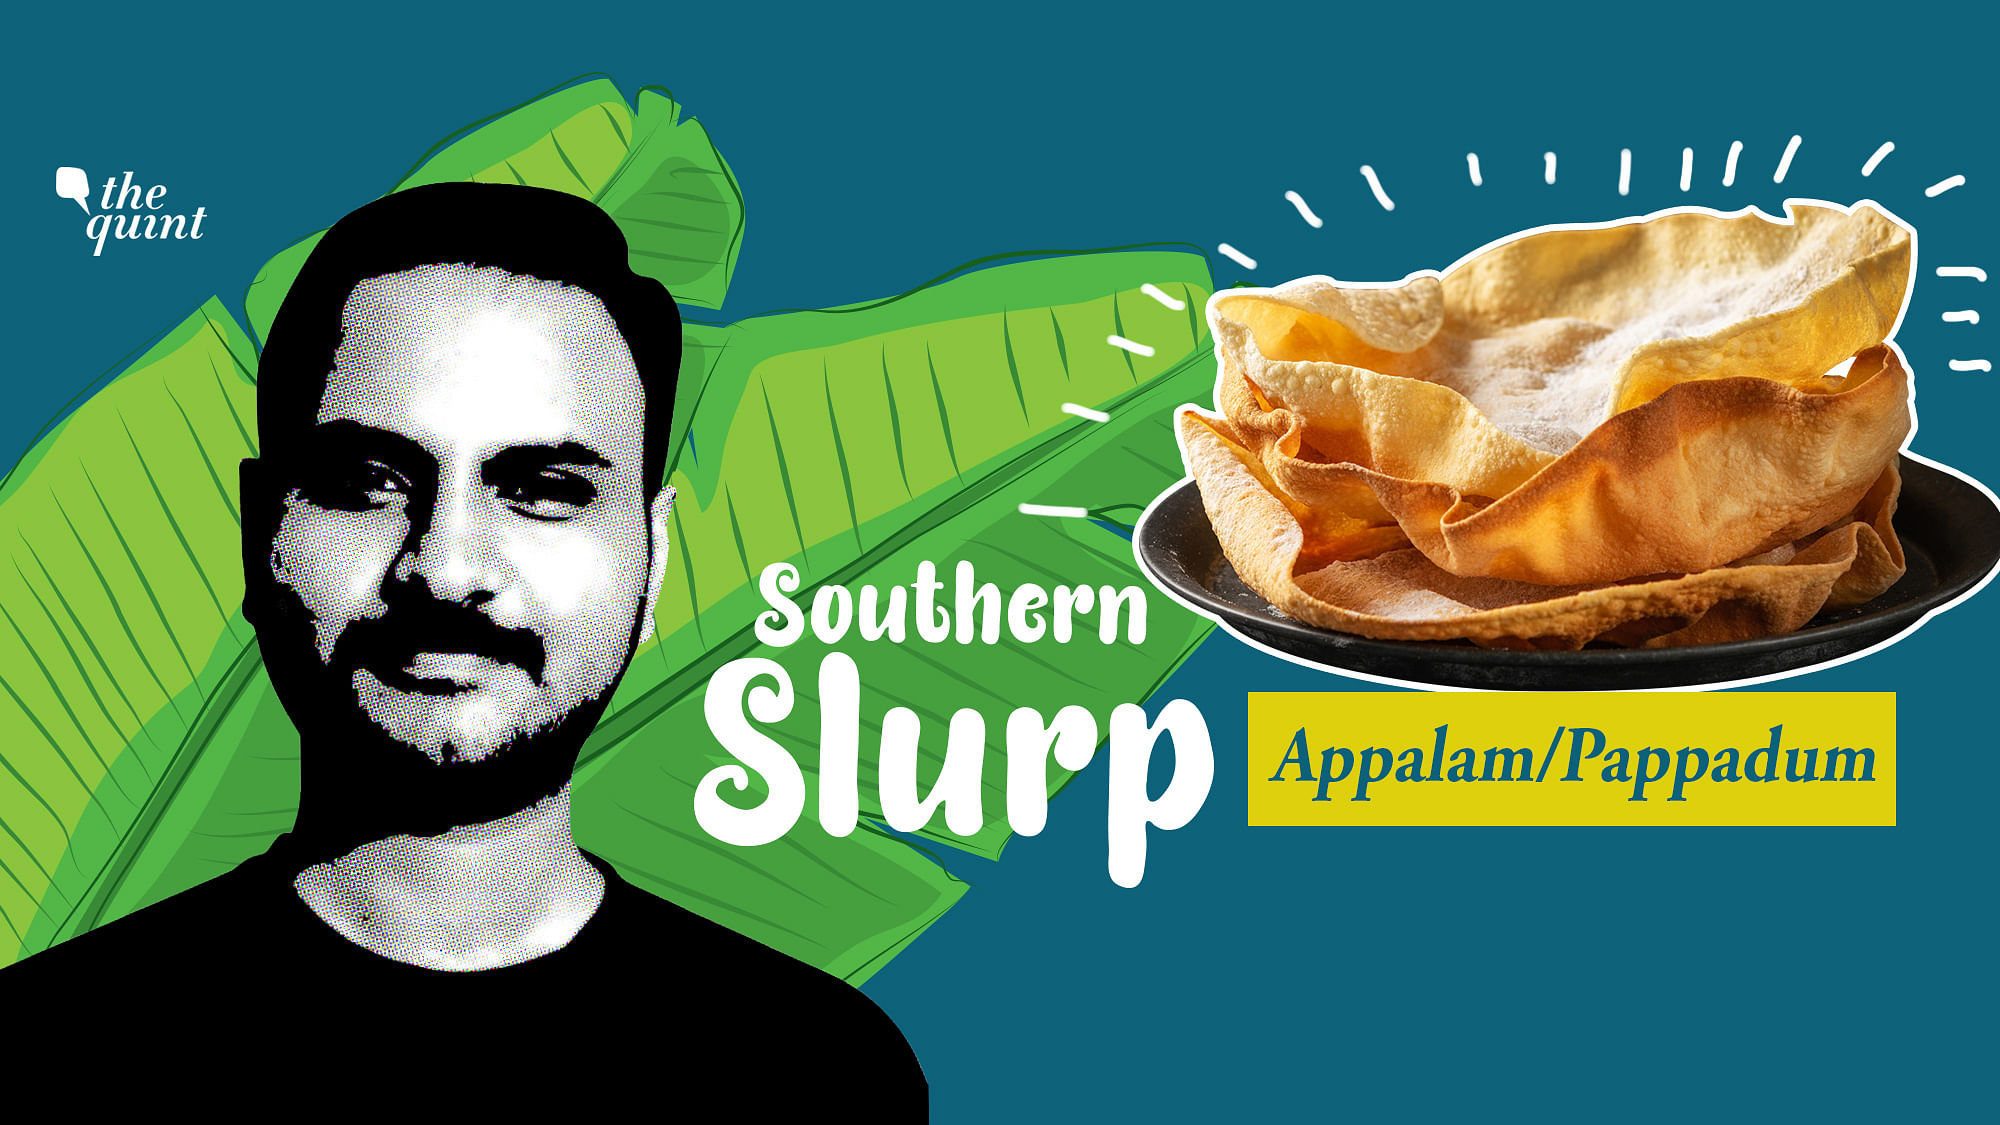 The appalam and the pappadum have a crunchy history.